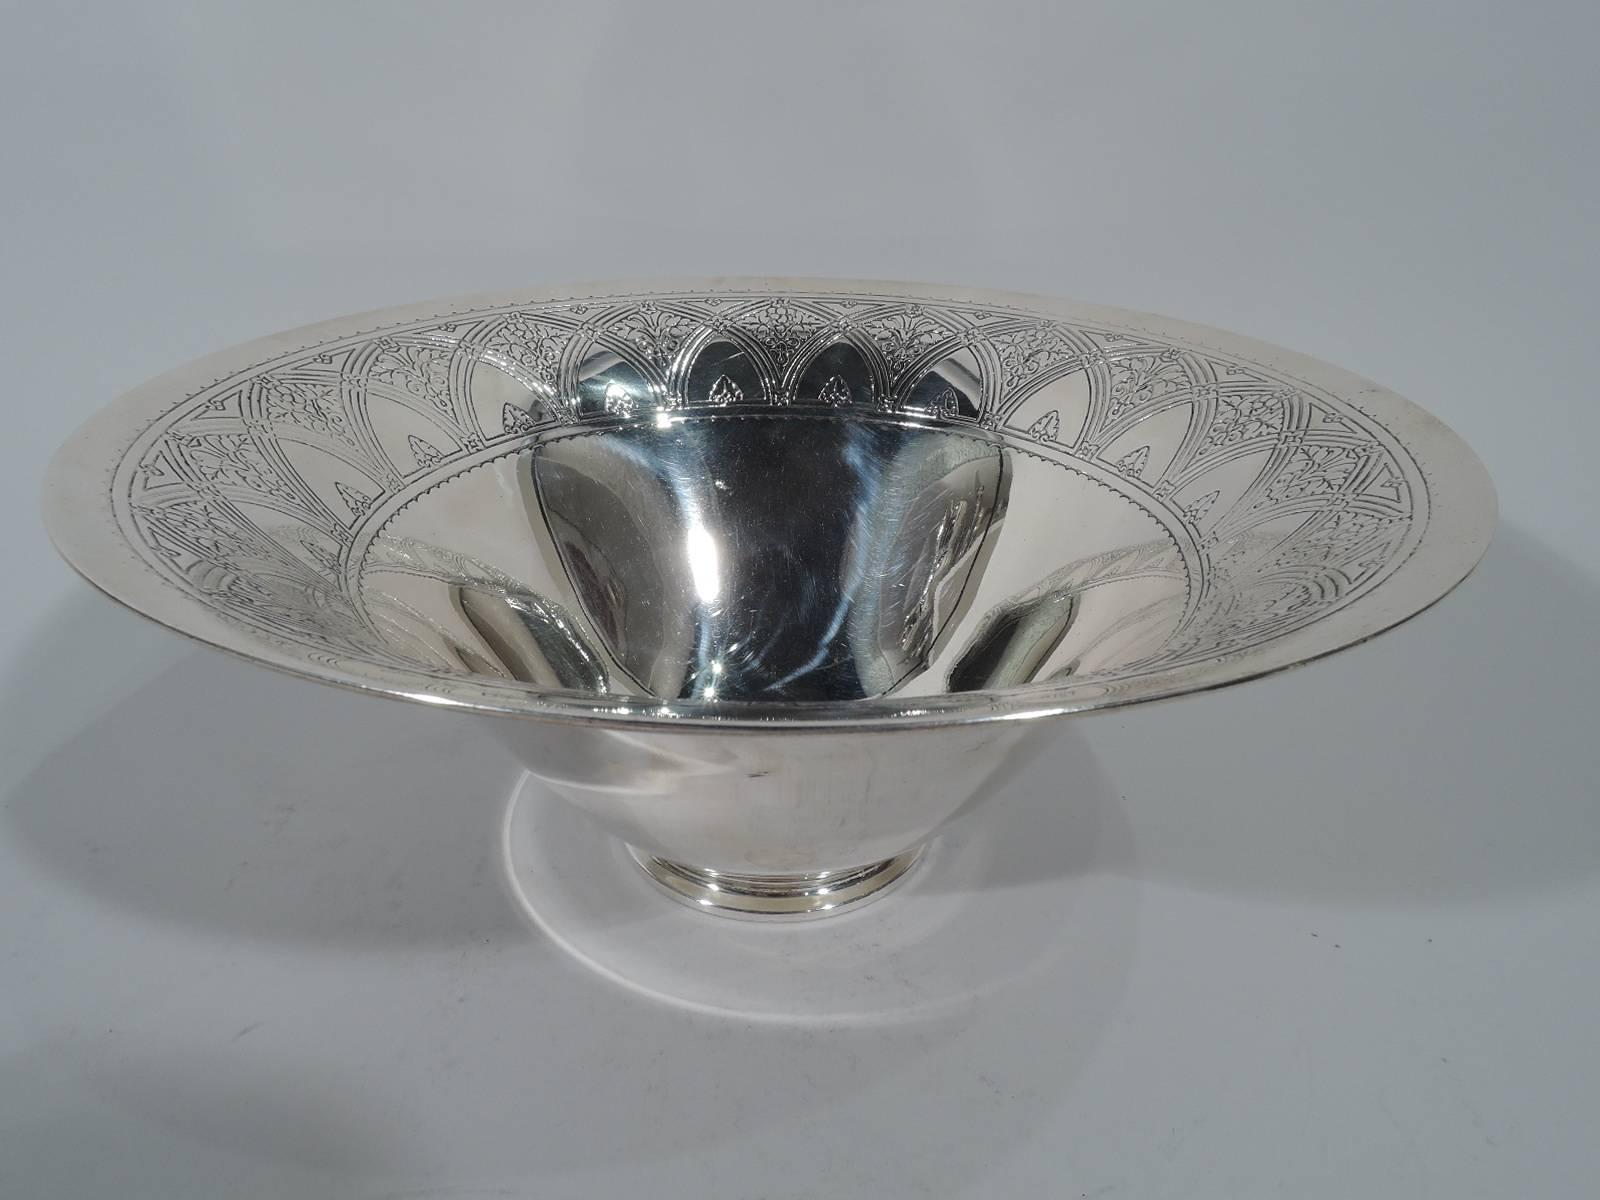 Art Deco sterling silver centrepiece bowl. Made by Tiffany & Co. in New York, circa 1924. Wide mouth, steeply tapering sides, and stepped foot. Interior has acid-etched interlaced arcade inset with flowers and scalloped border. A semi-abstract